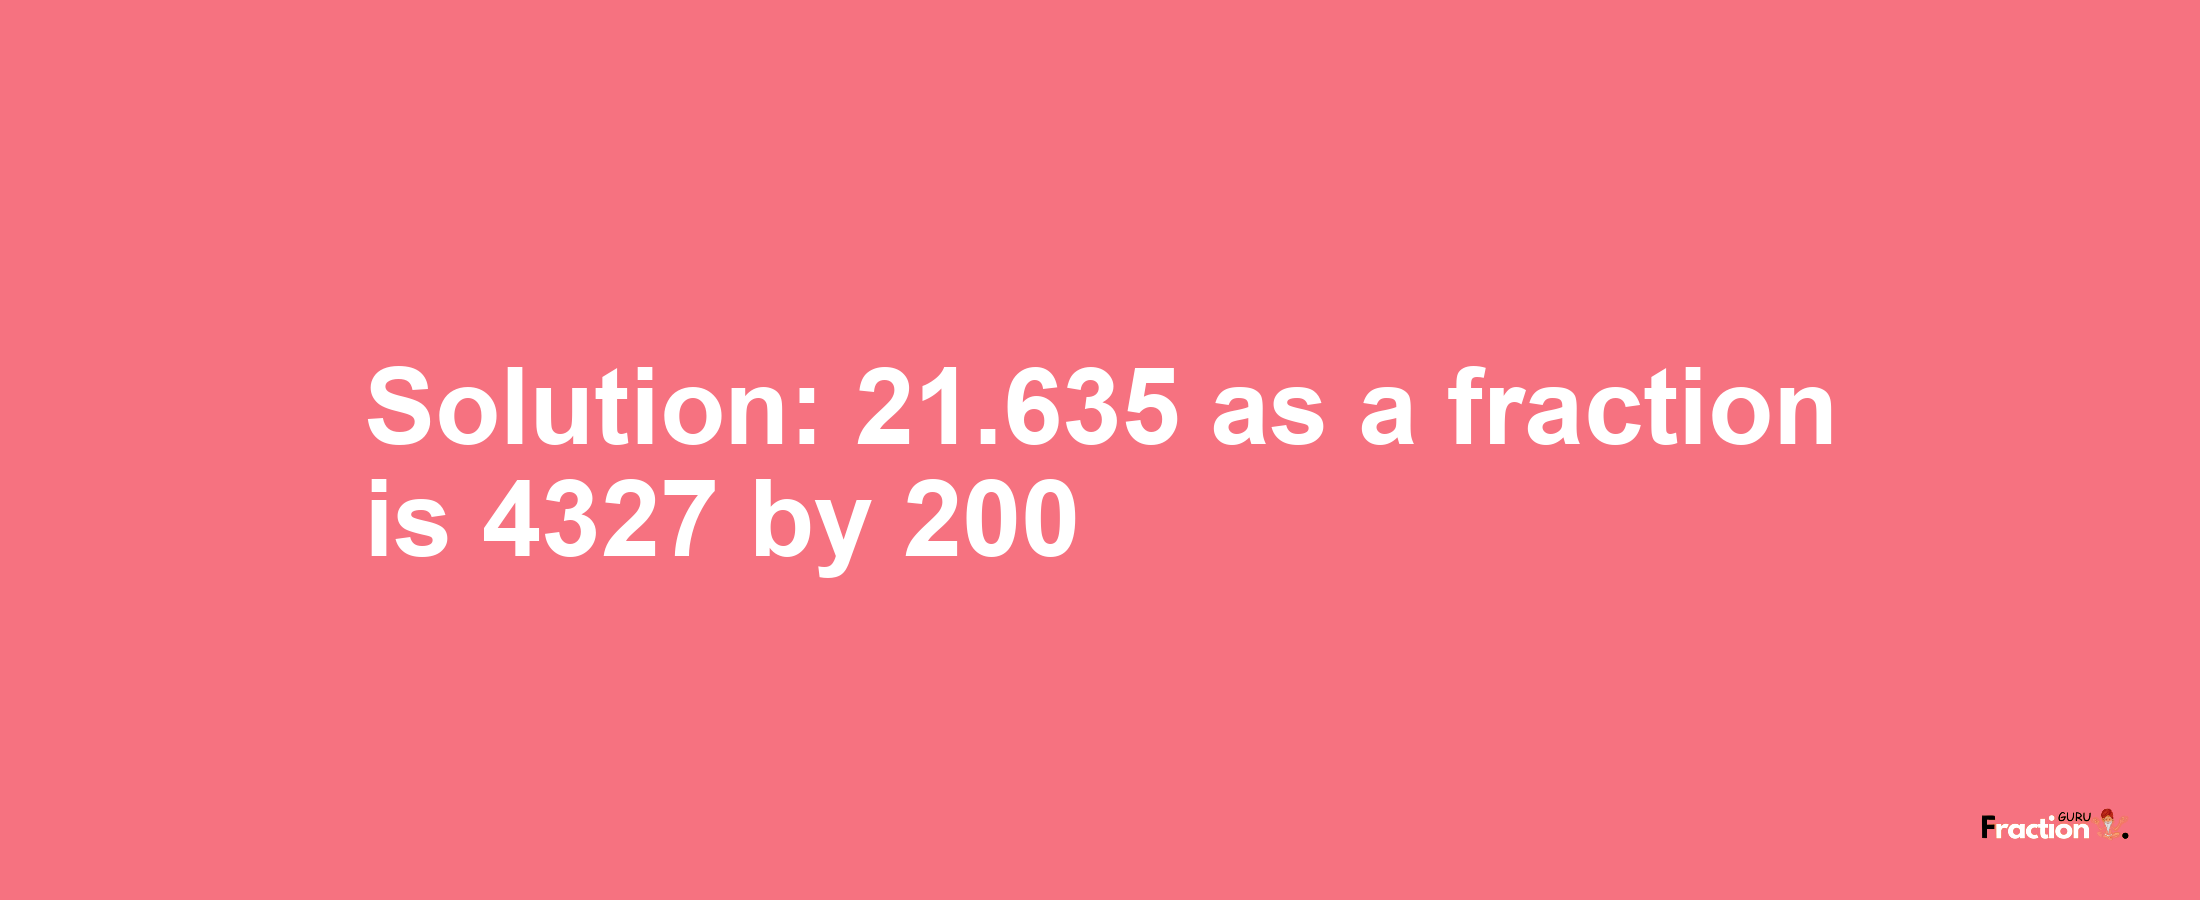 Solution:21.635 as a fraction is 4327/200